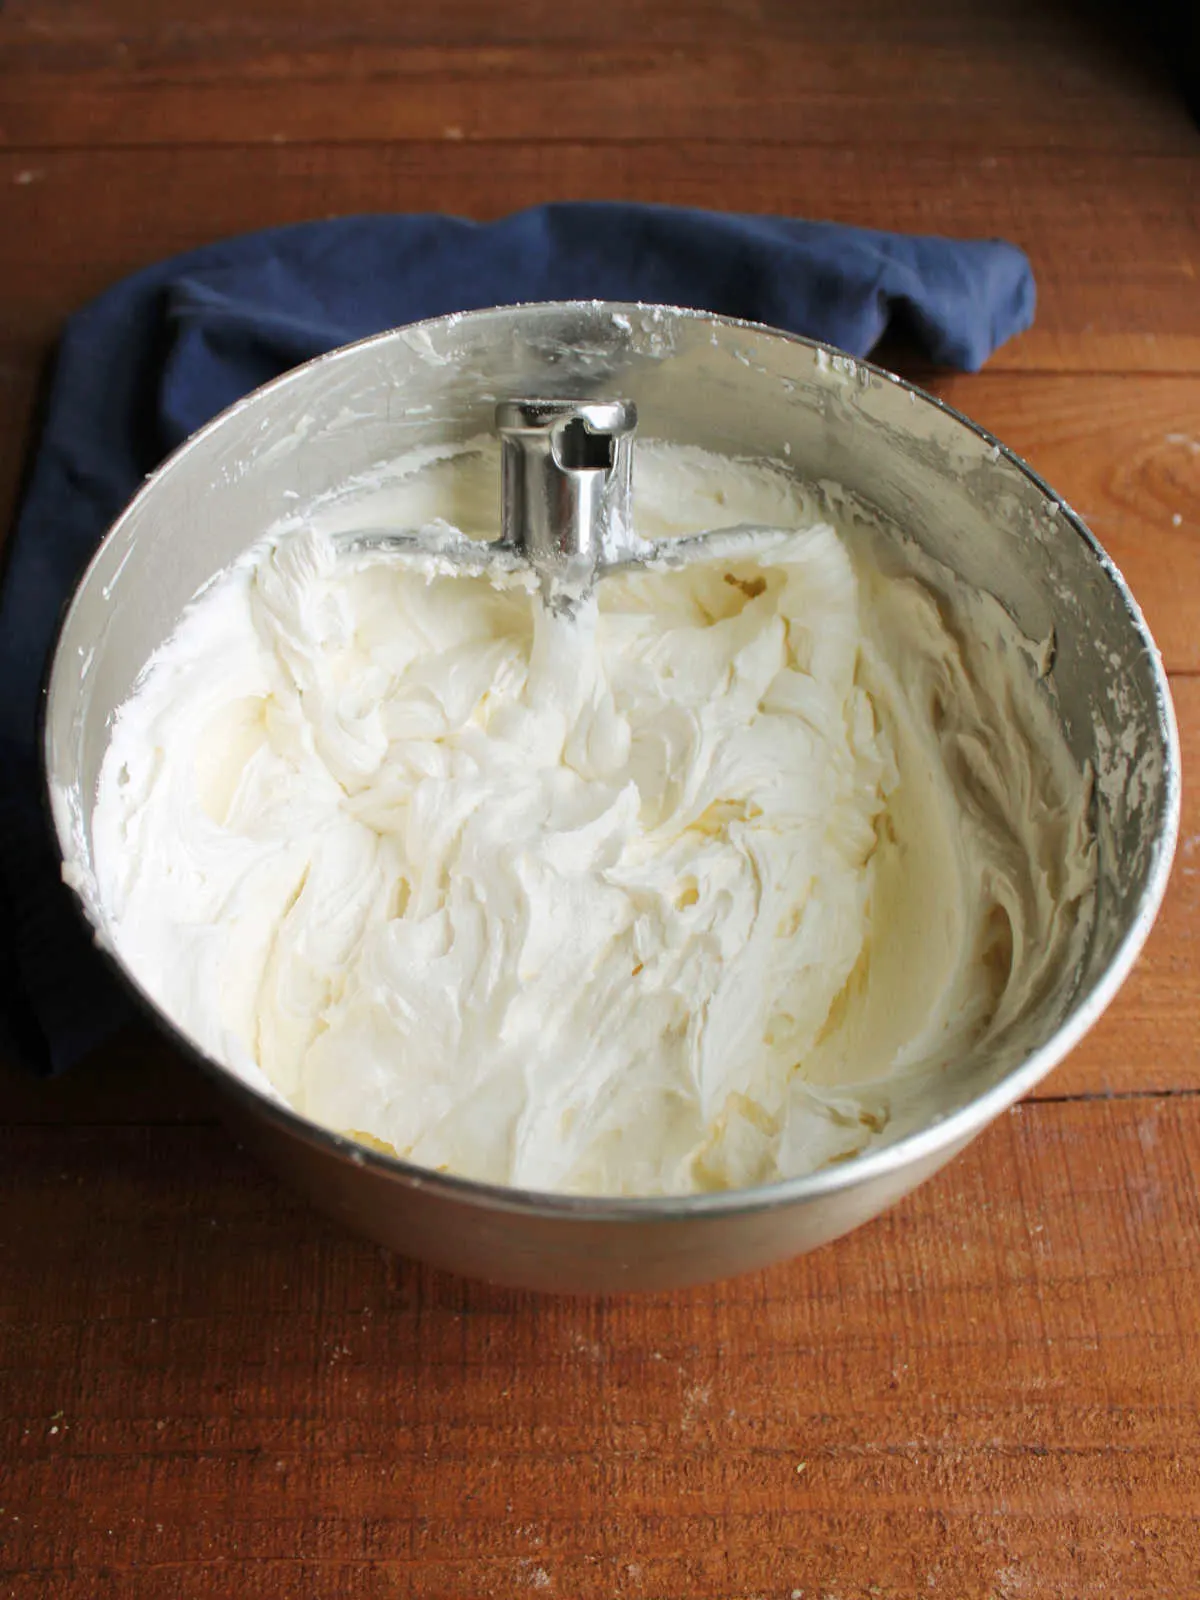 Mixer bowl of fluffy white buttercream frosting, ready to be used.